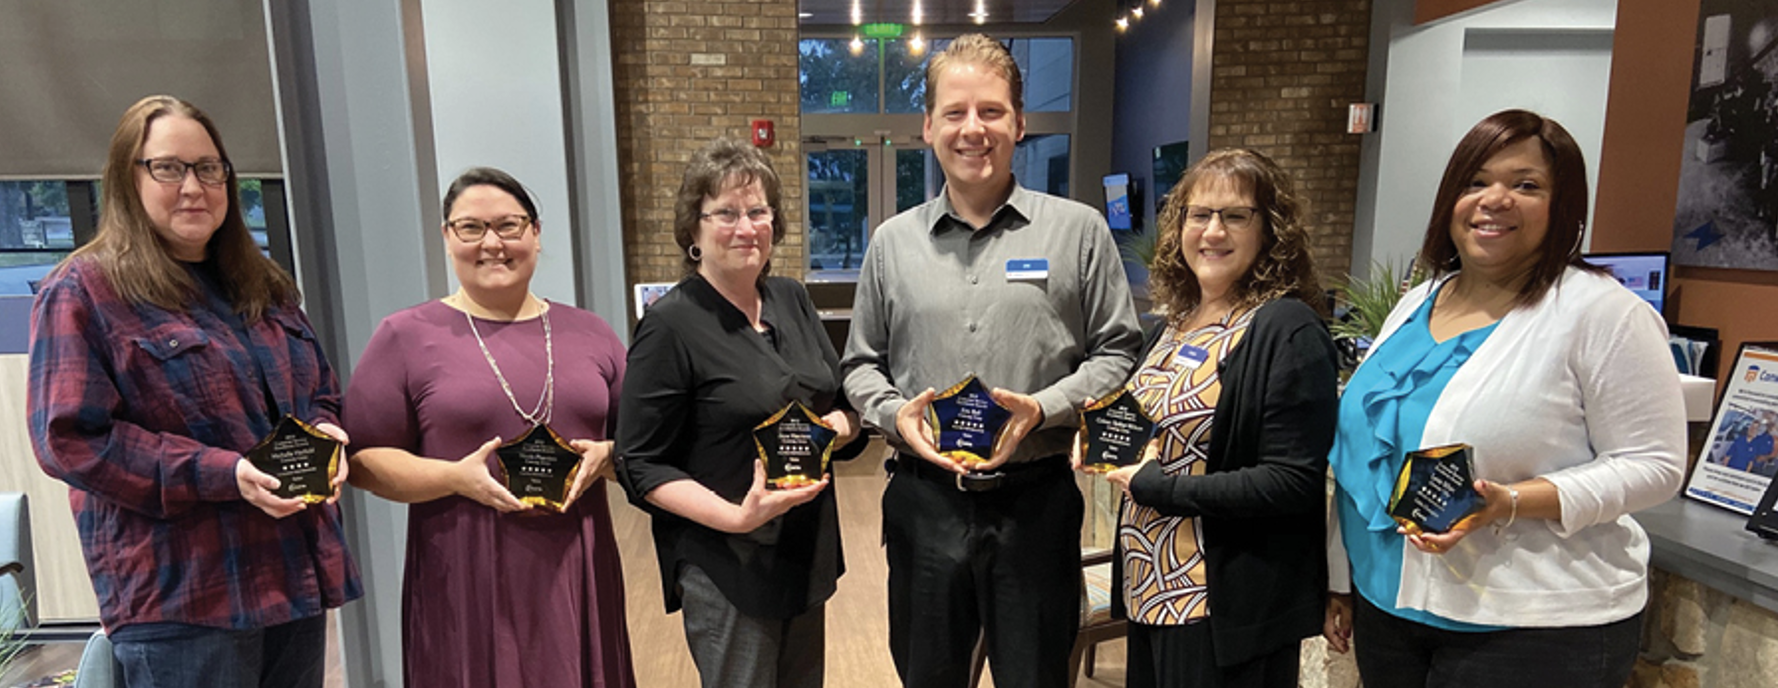 Conway Corp Customer Service Recognized for Excellence